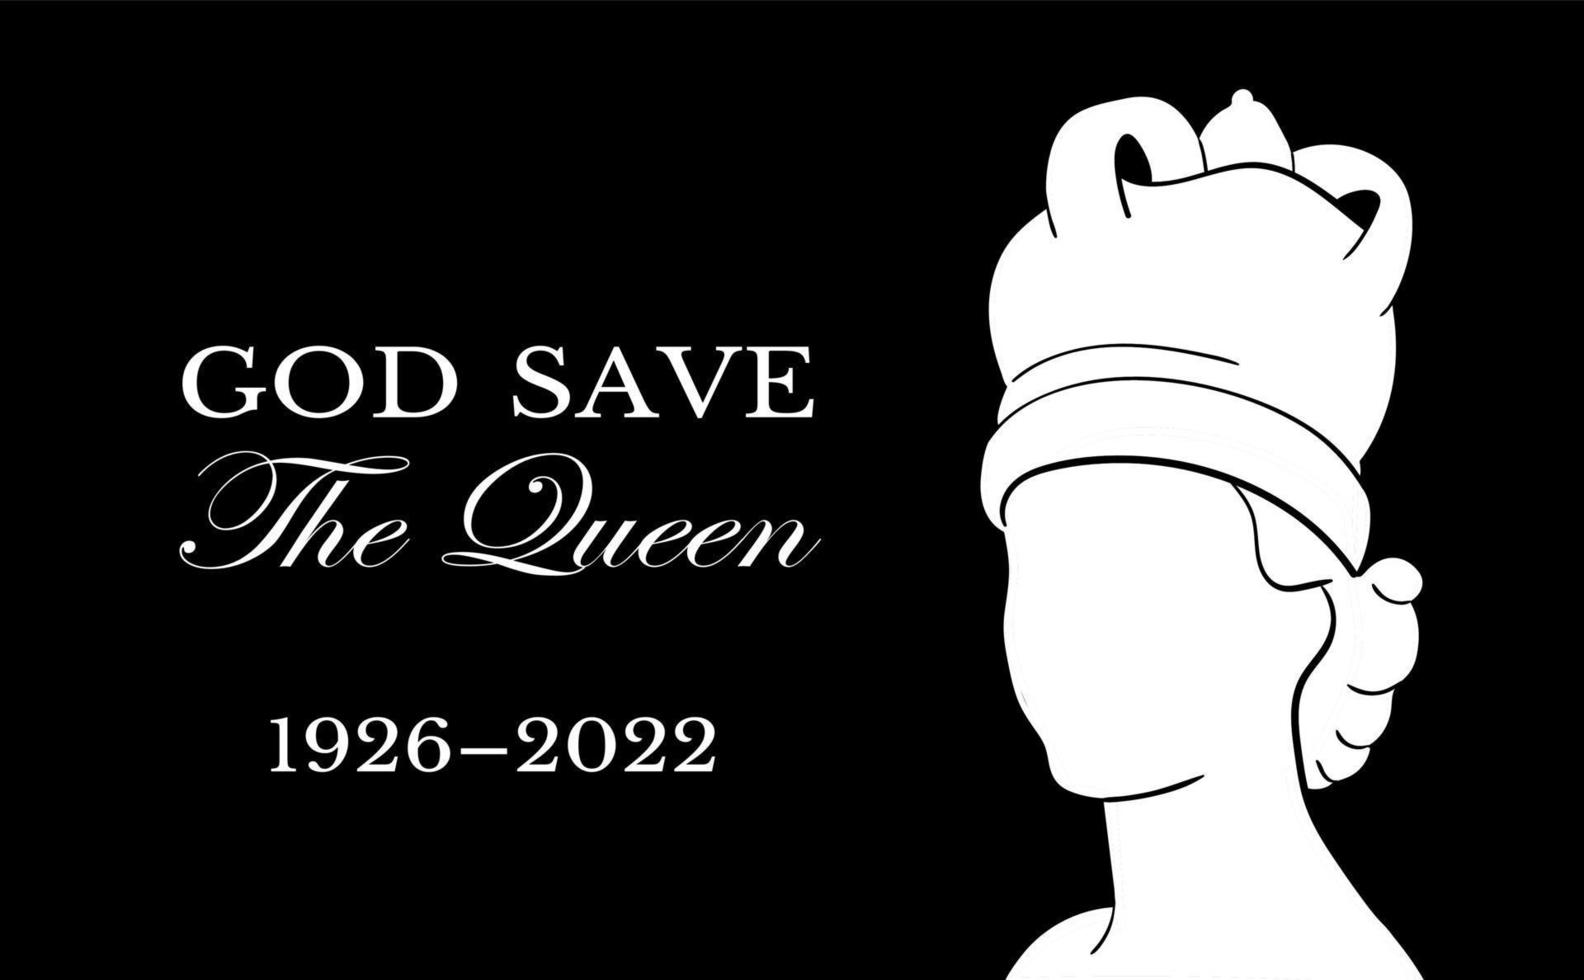 The Queen's death. RIP, God save the Queen.  Rest in peace poster with silhouette of Queen Elizabeth on flag background. Vector illustration for Her Majesty on her 96 years